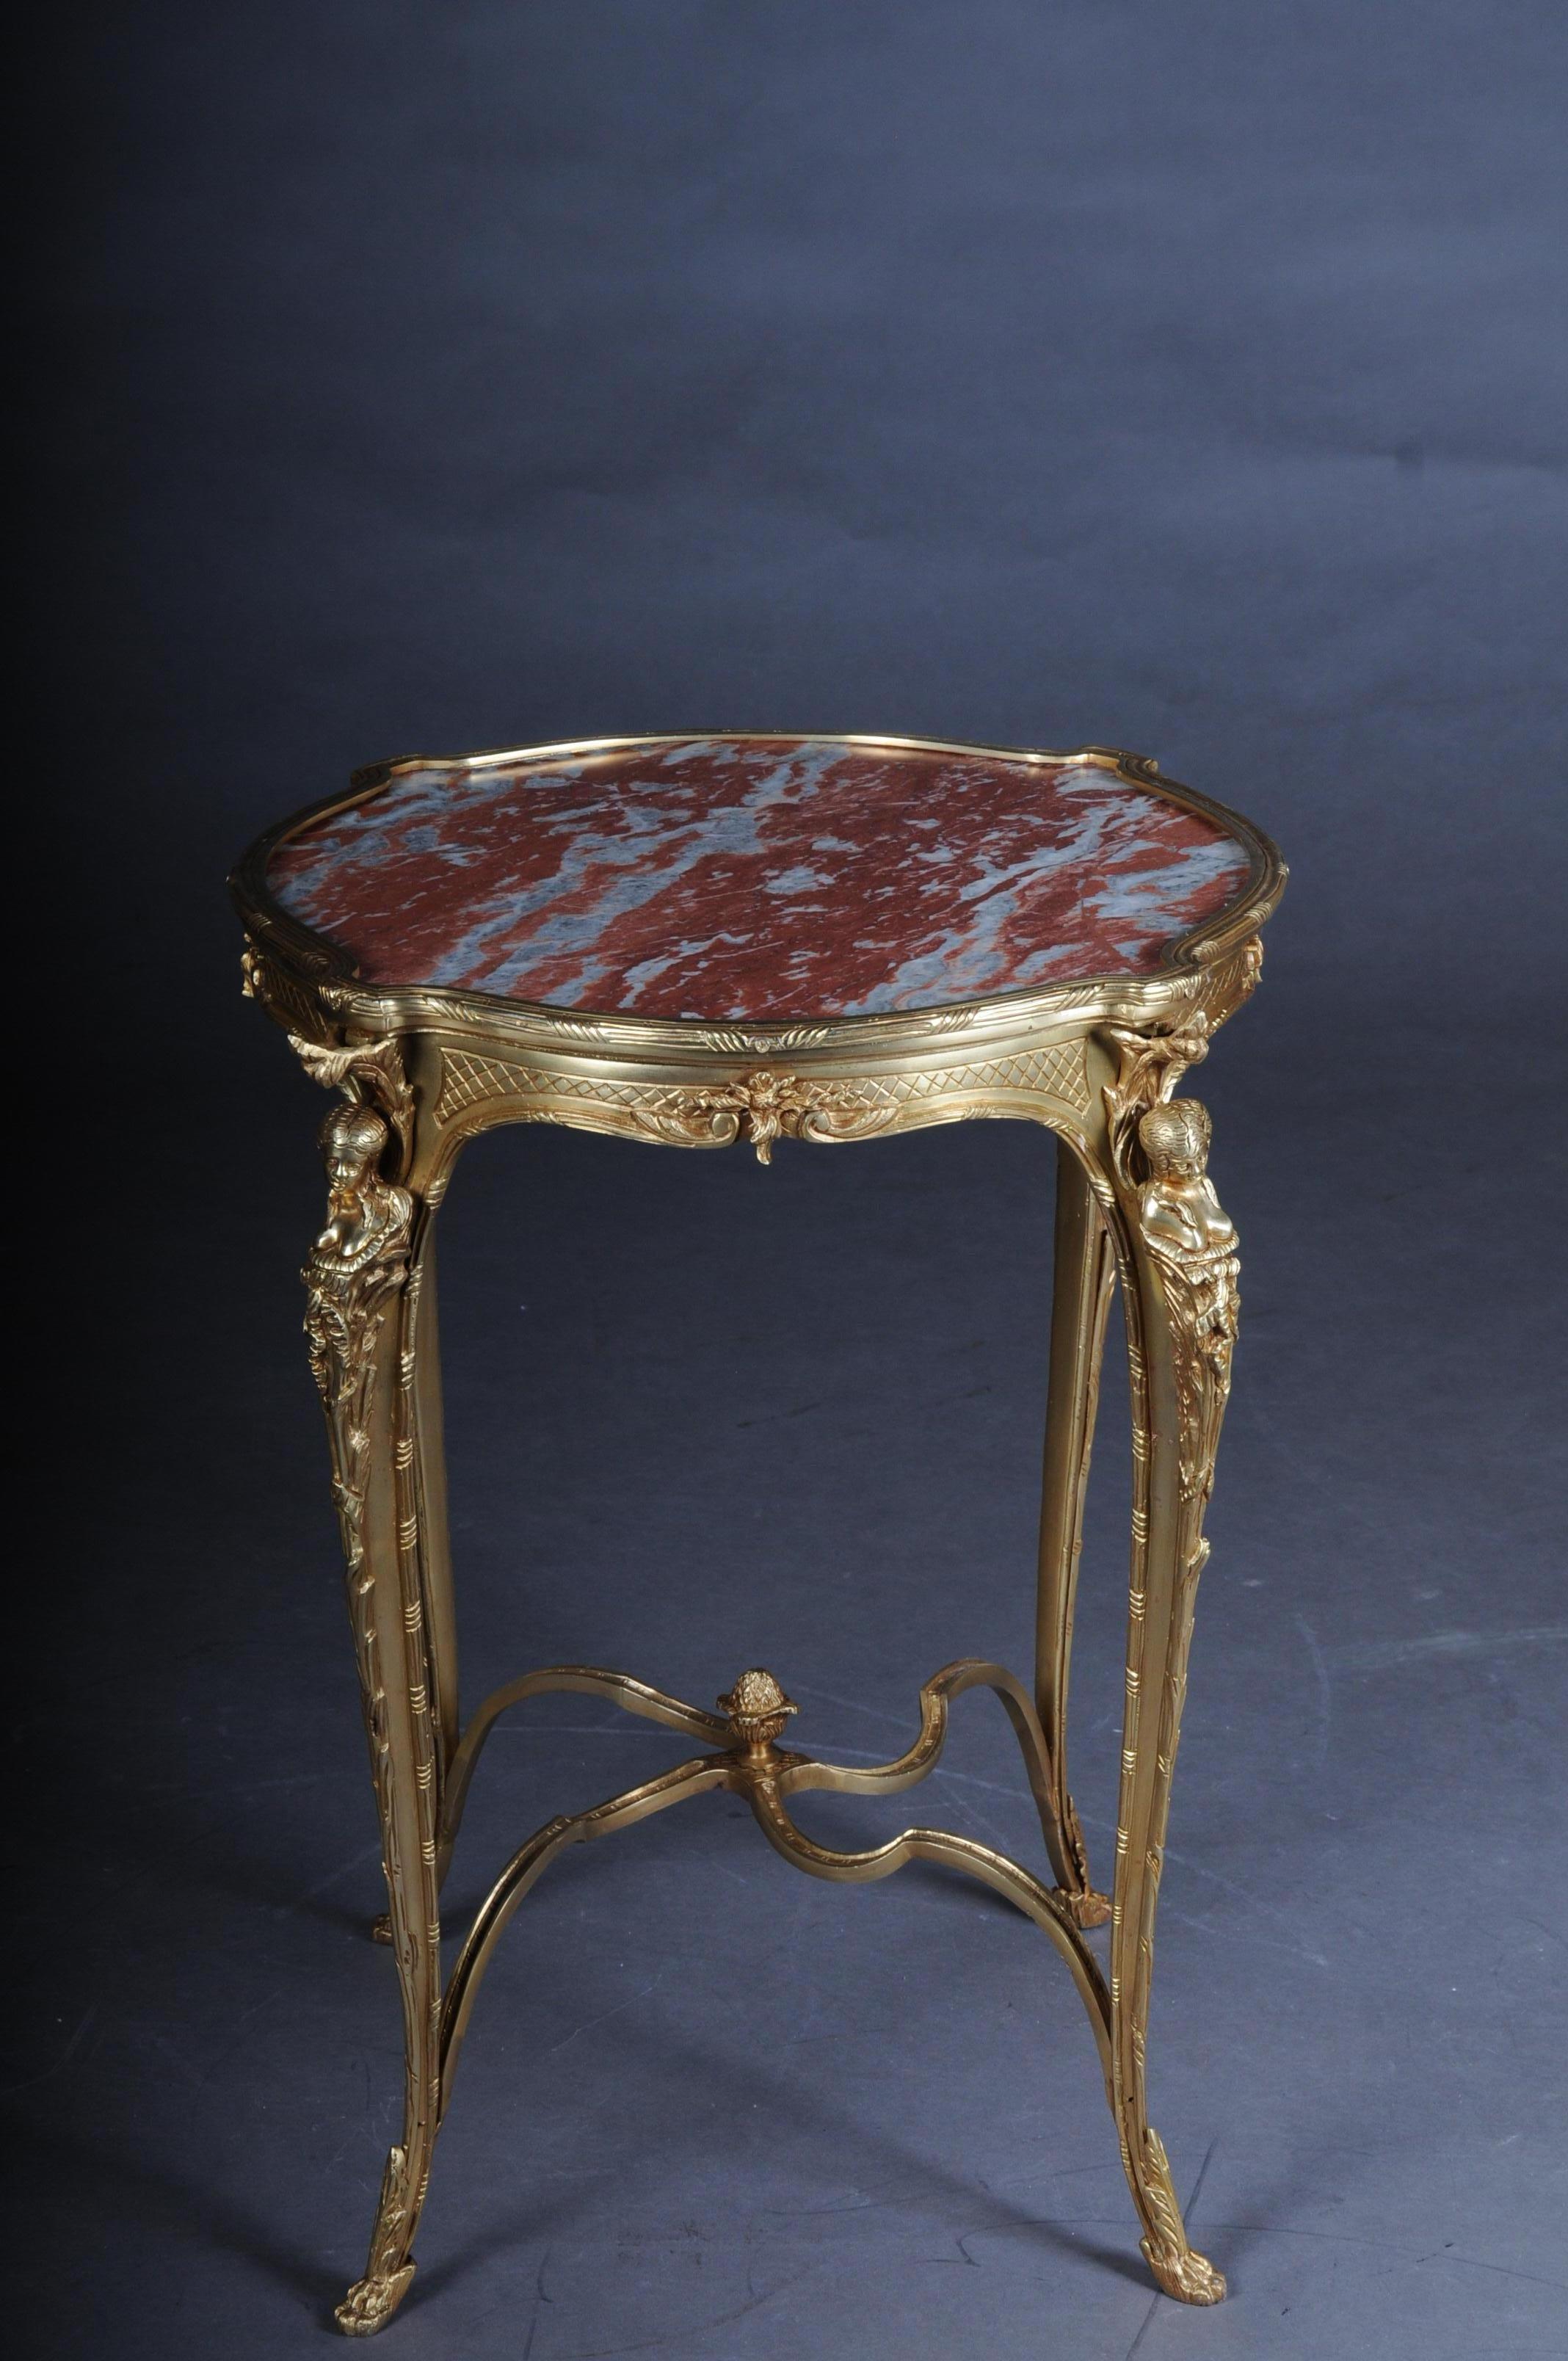 Magnificent French bronze pompom table or side table to Zwiener, Napoleon III

Finely chased and gilded bronze. Three curly legs connected with gutter. Slightly protruding, cover plate with bordered marble top. The legs are in the form of three